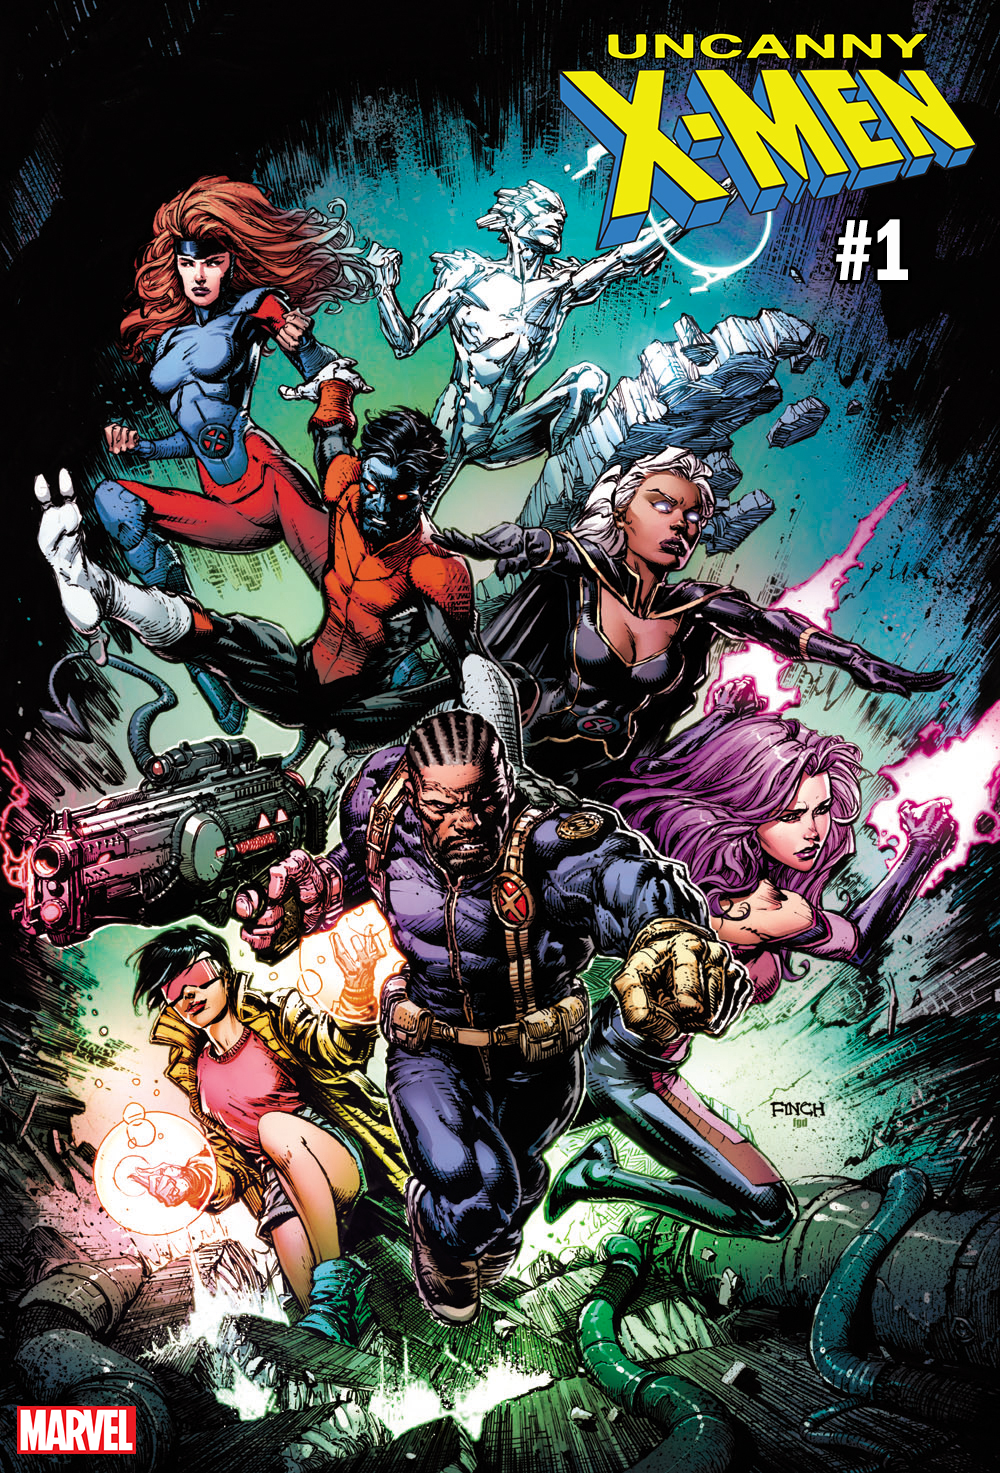 Get in an Uncanny mood with David Finch's excellent Uncanny X-Men #1 variant cover